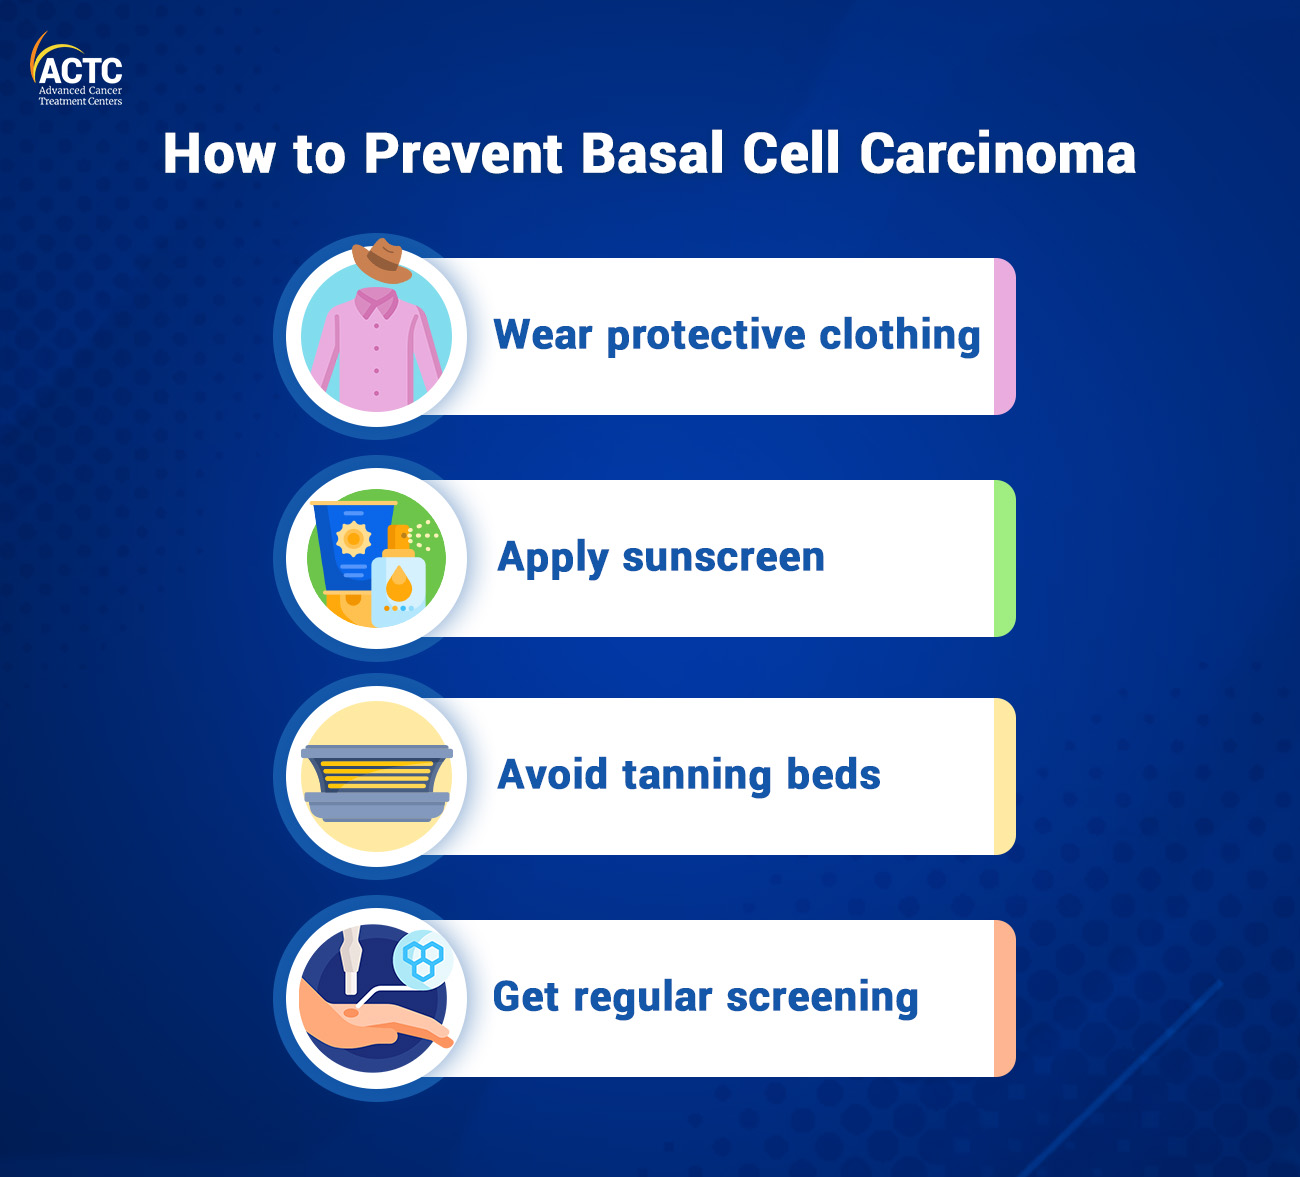 How to Prevent Basal Cell Carcinoma